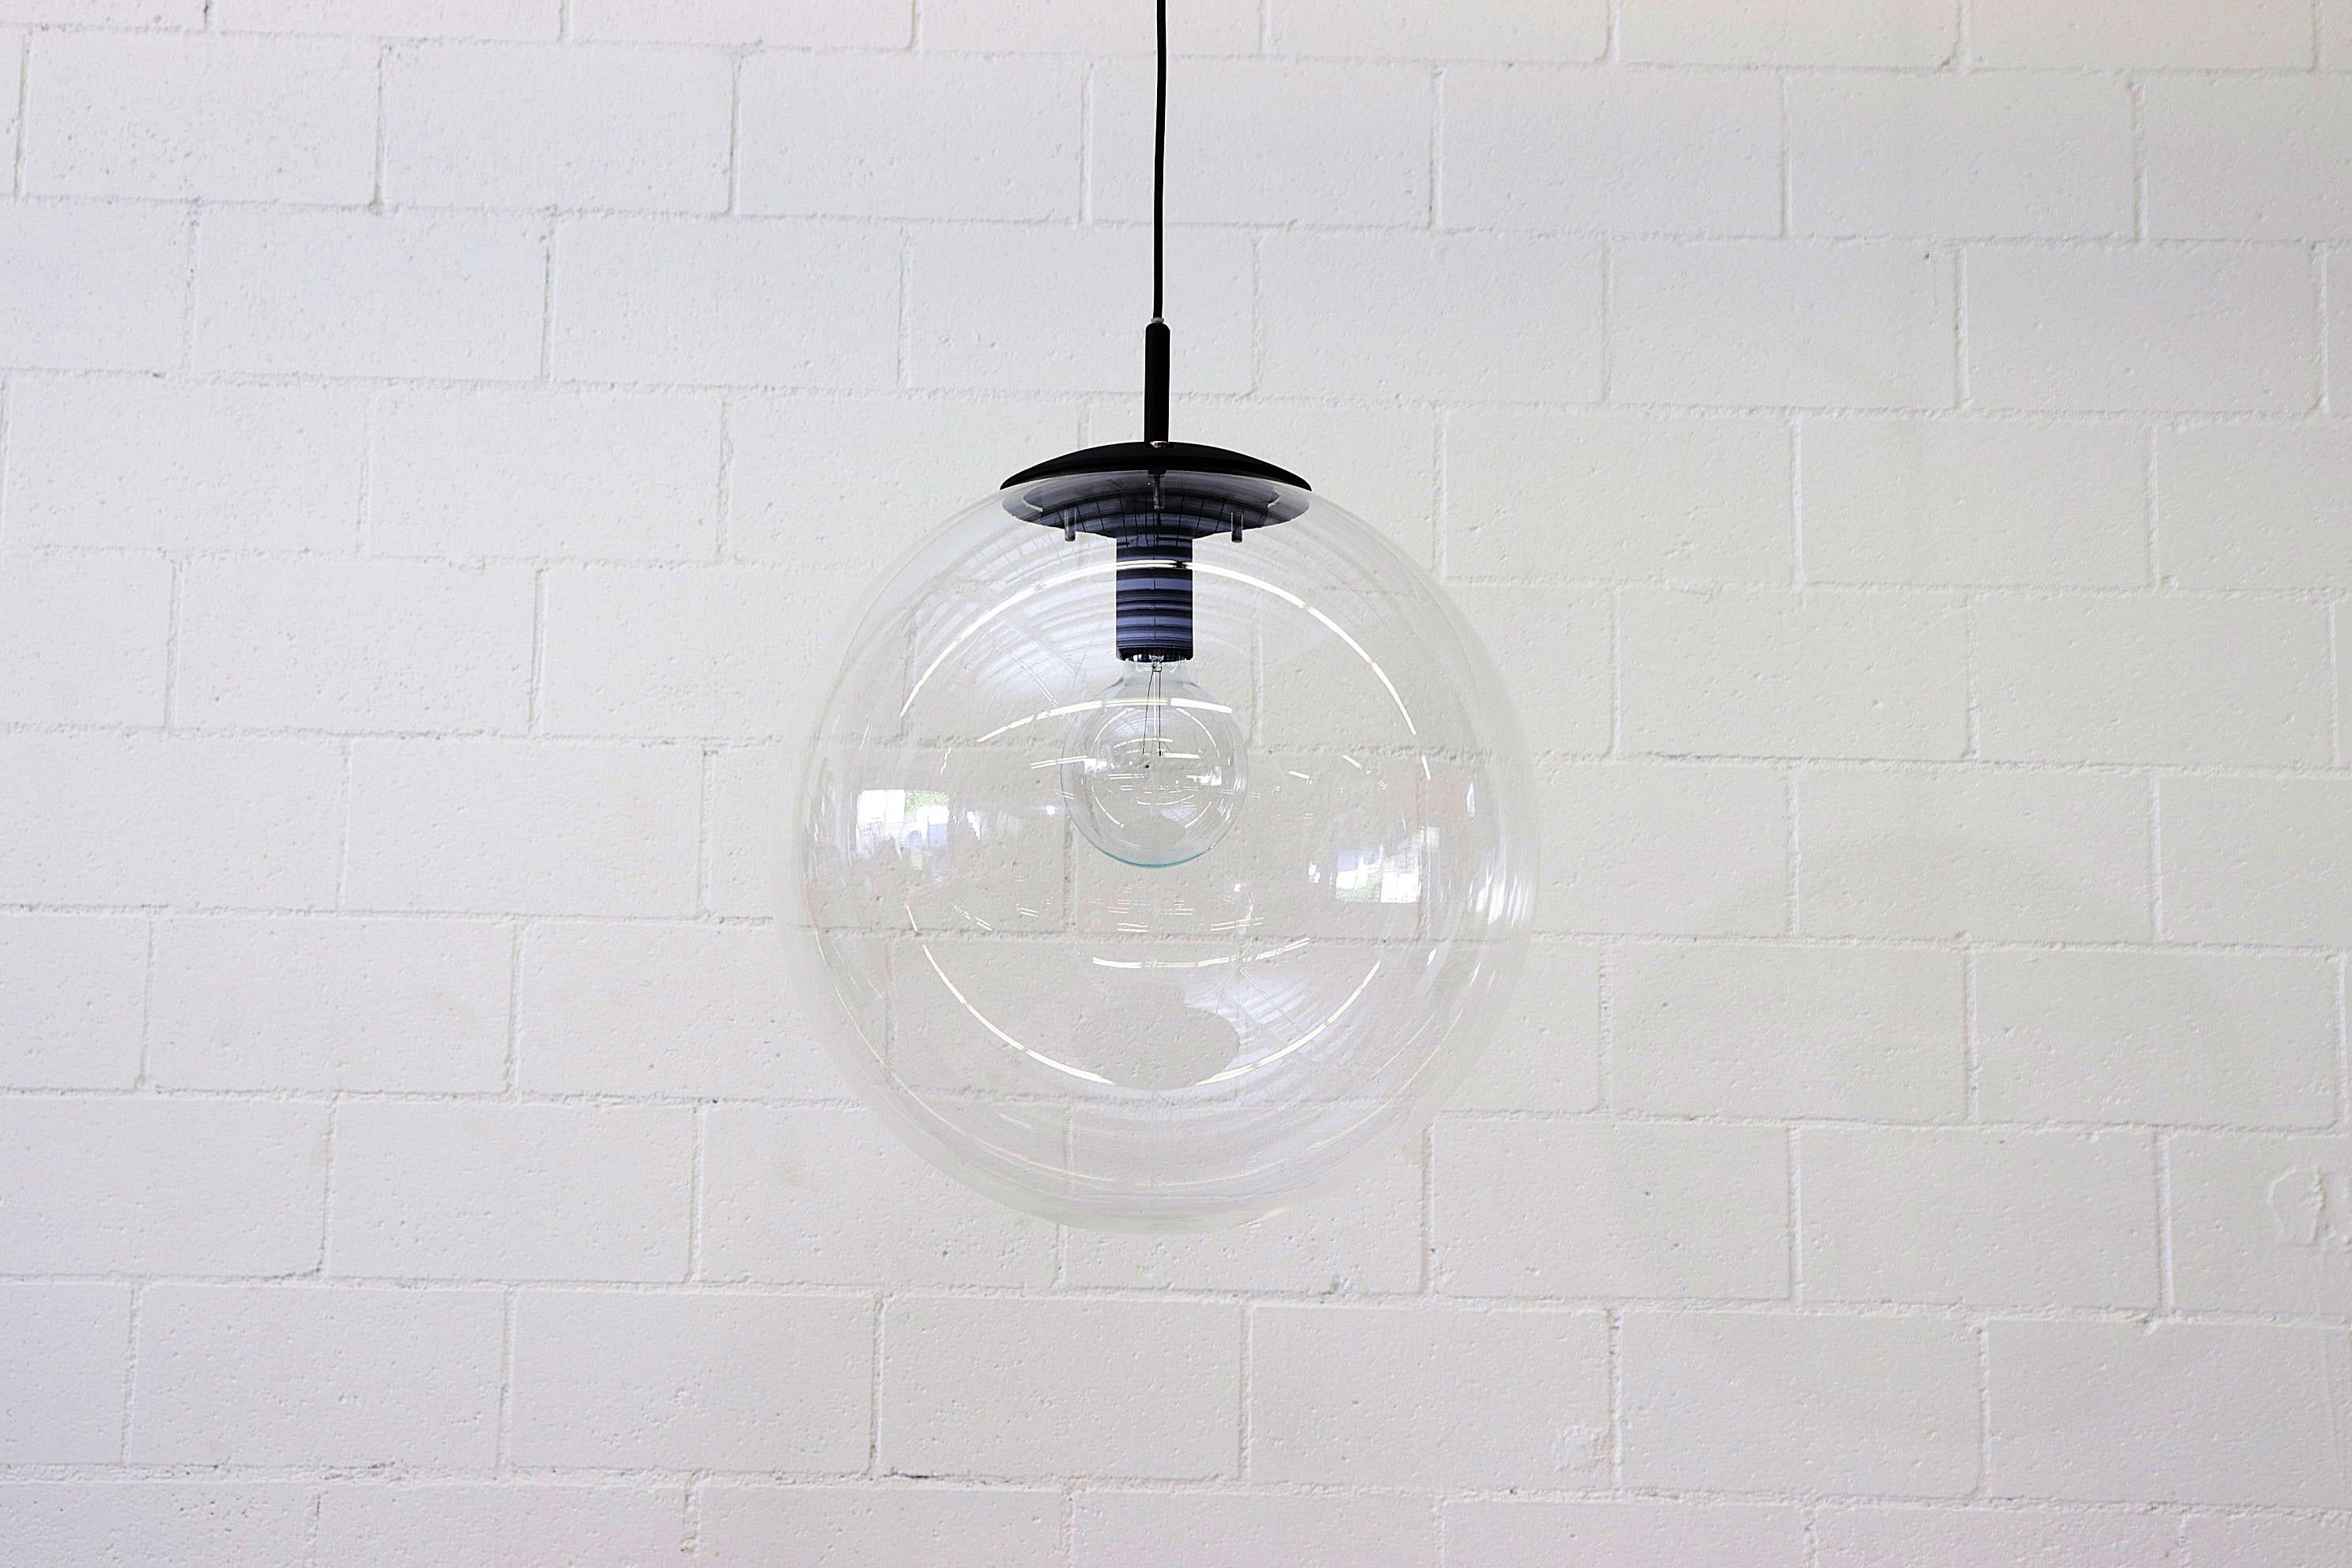 Jumbo Clear Acrylic Globe Lights with Black Enameled Hardware and Standard Light Socket. In Original Condition. Shot with G40 Bulb (not included). Other Similar Globe Pendants Available and Listed Separately.